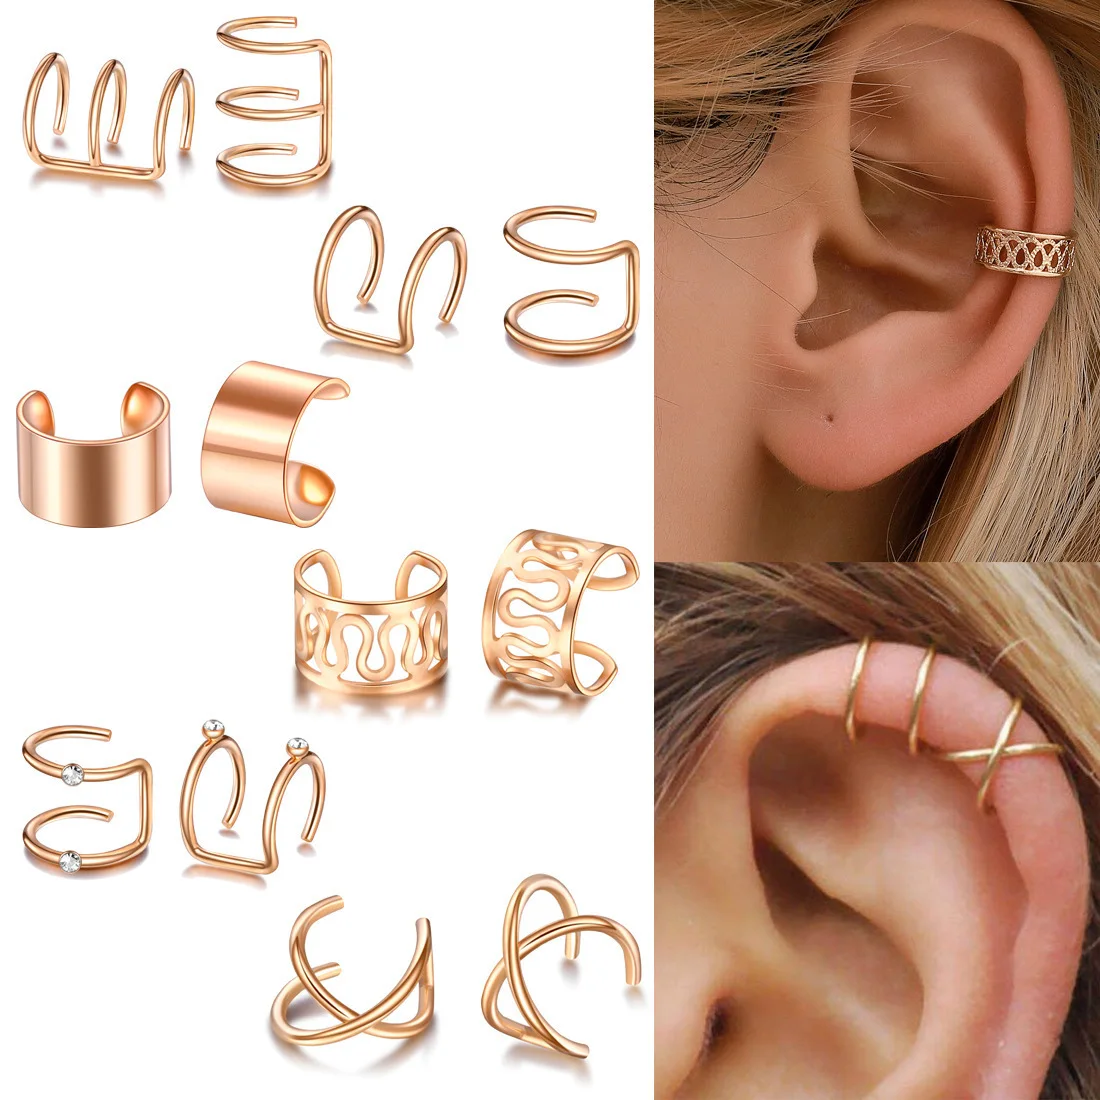 

12pcs Bohemian Gold Color Ear Cuffs Leaf Clip Earrings For Women Climbers No Piercing Simple Cartilage Earring Accessories